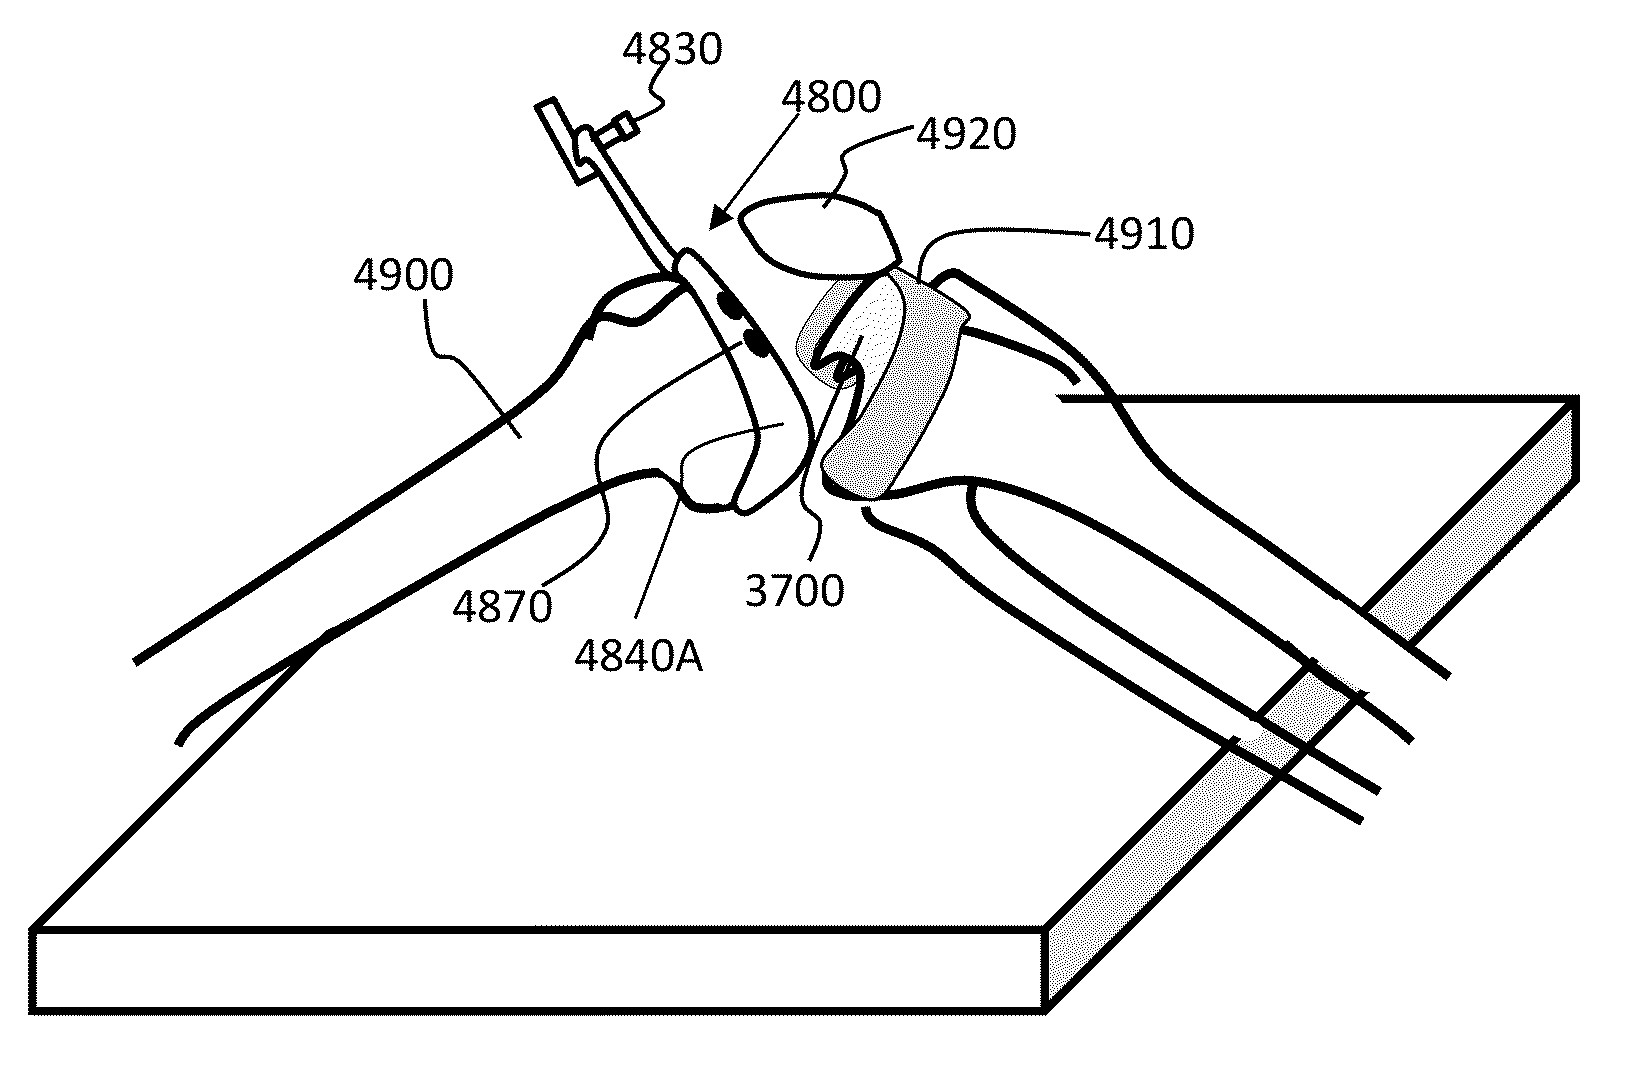 Bone cutting system for alignment relative to a mechanical axis